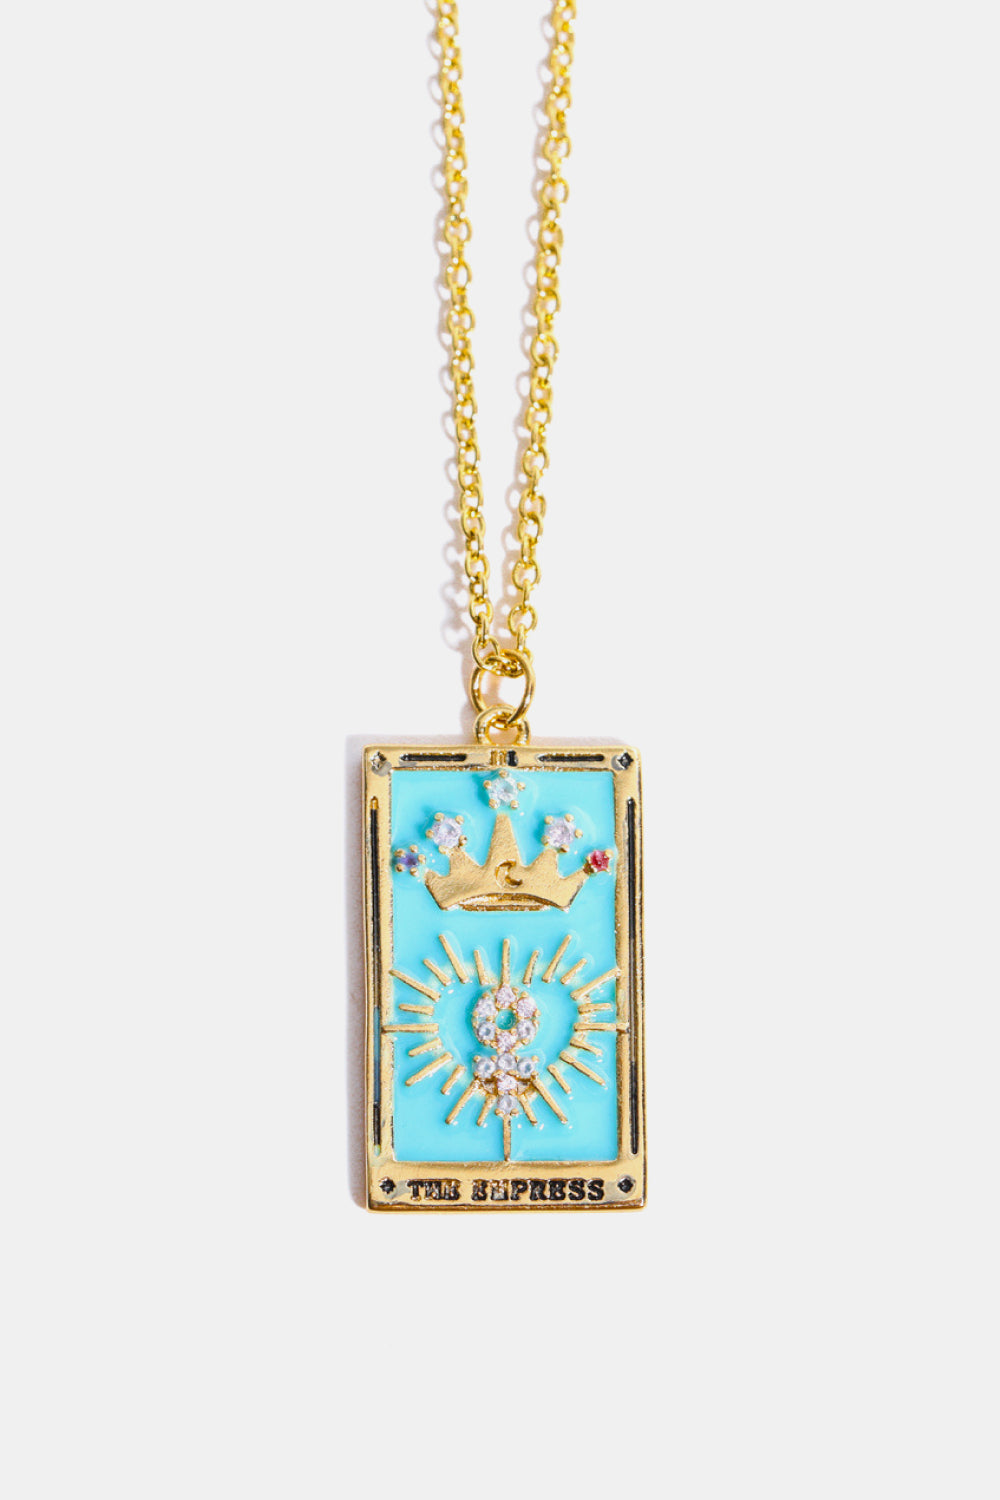 Trendsi Cupid Beauty Supplies Queen / One Size Women Necklace Tarot Card Pendant Stainless Steel Necklace